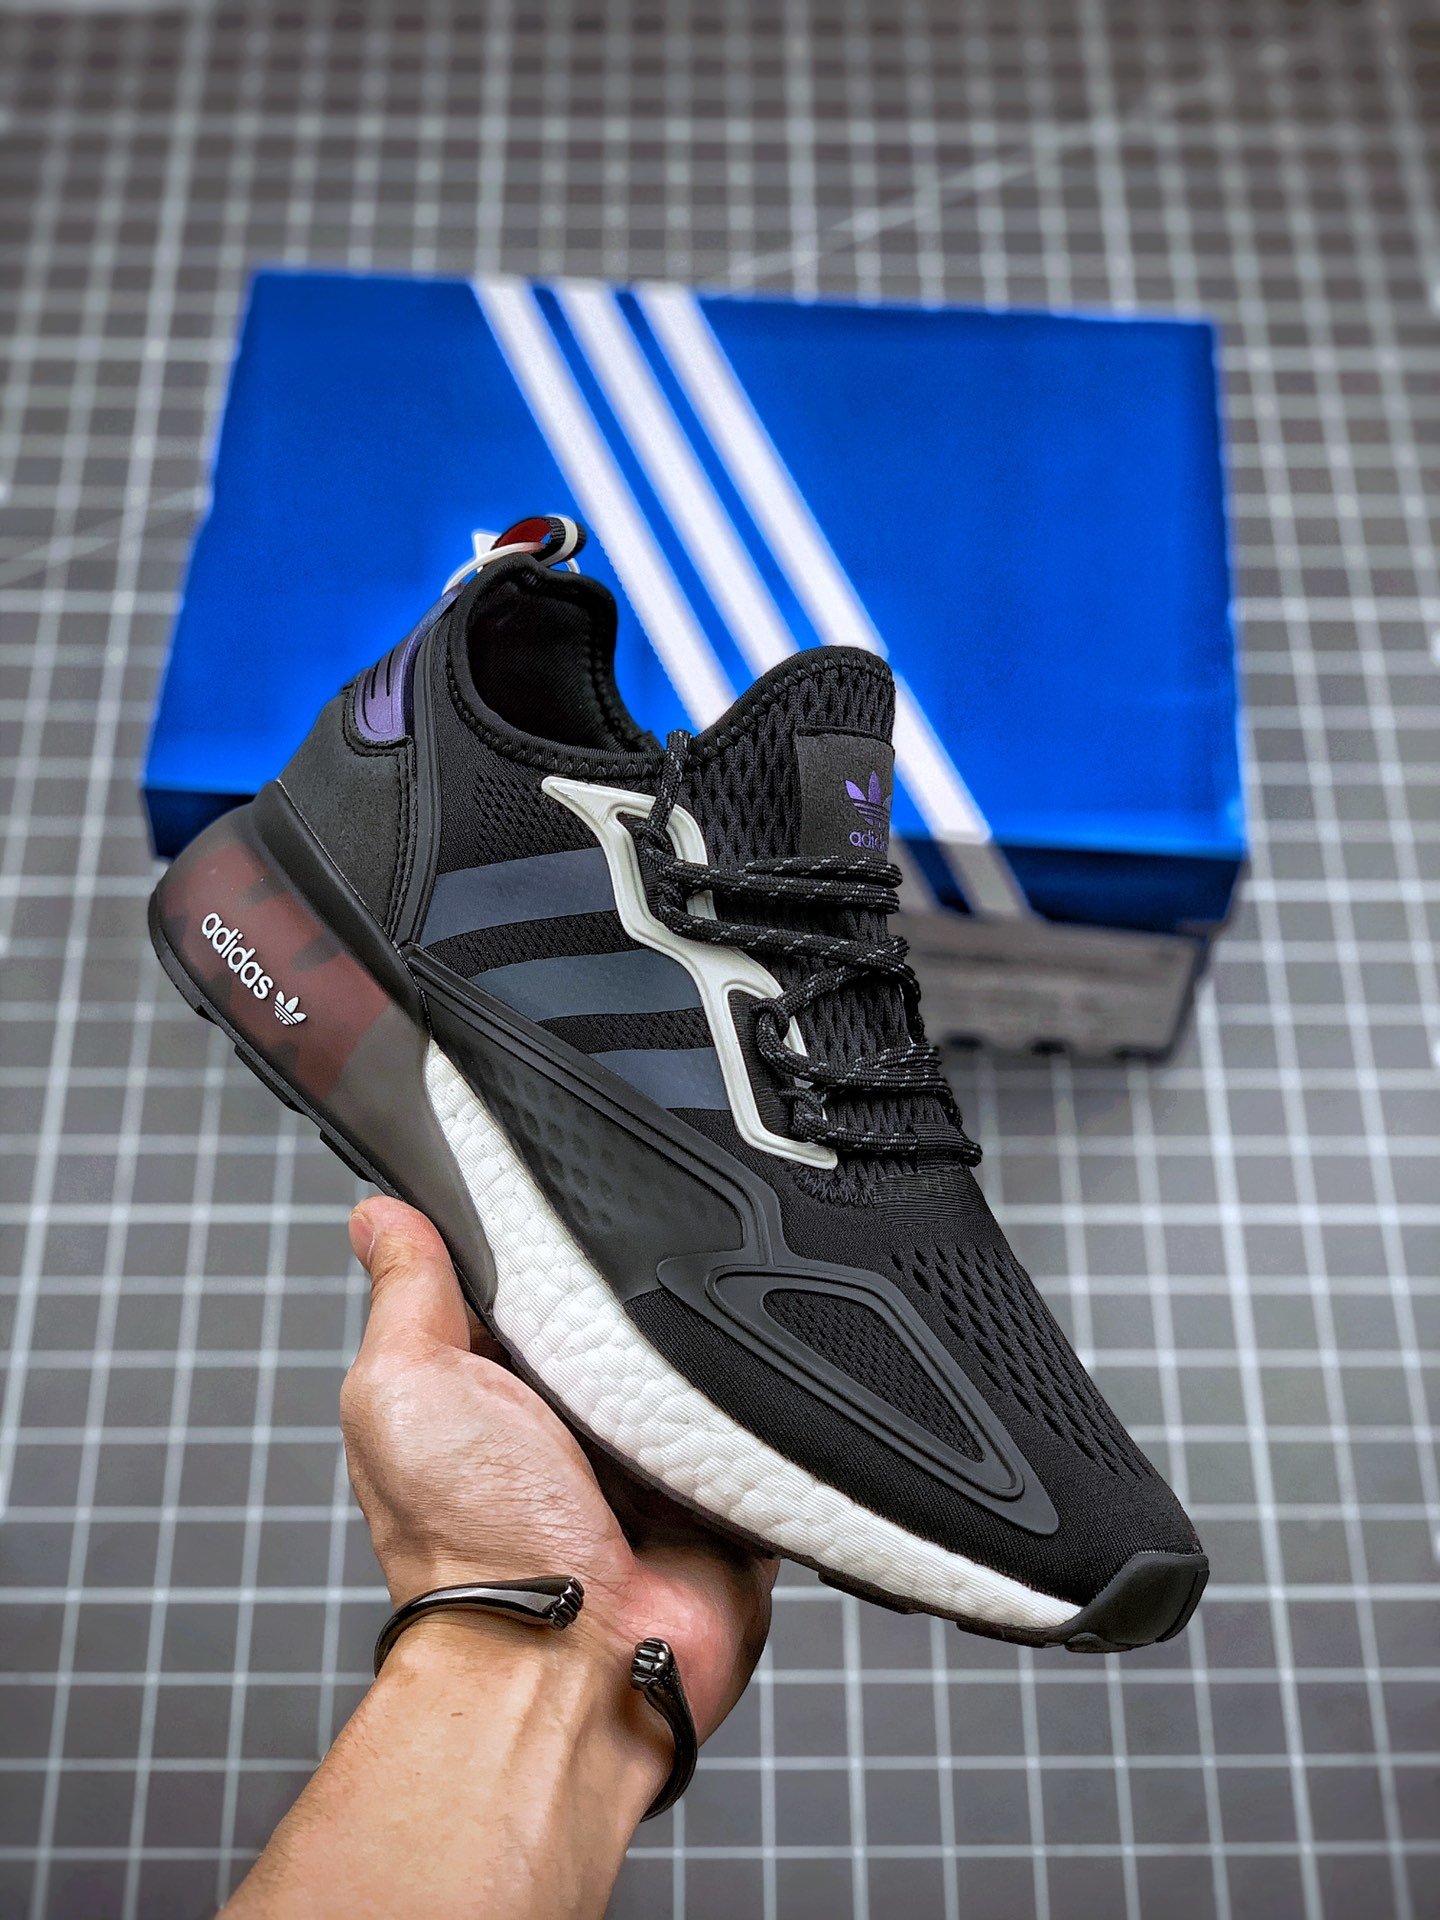 adidas ZX 2K Boost Black/Supplier Colour/Shock Red Shoes